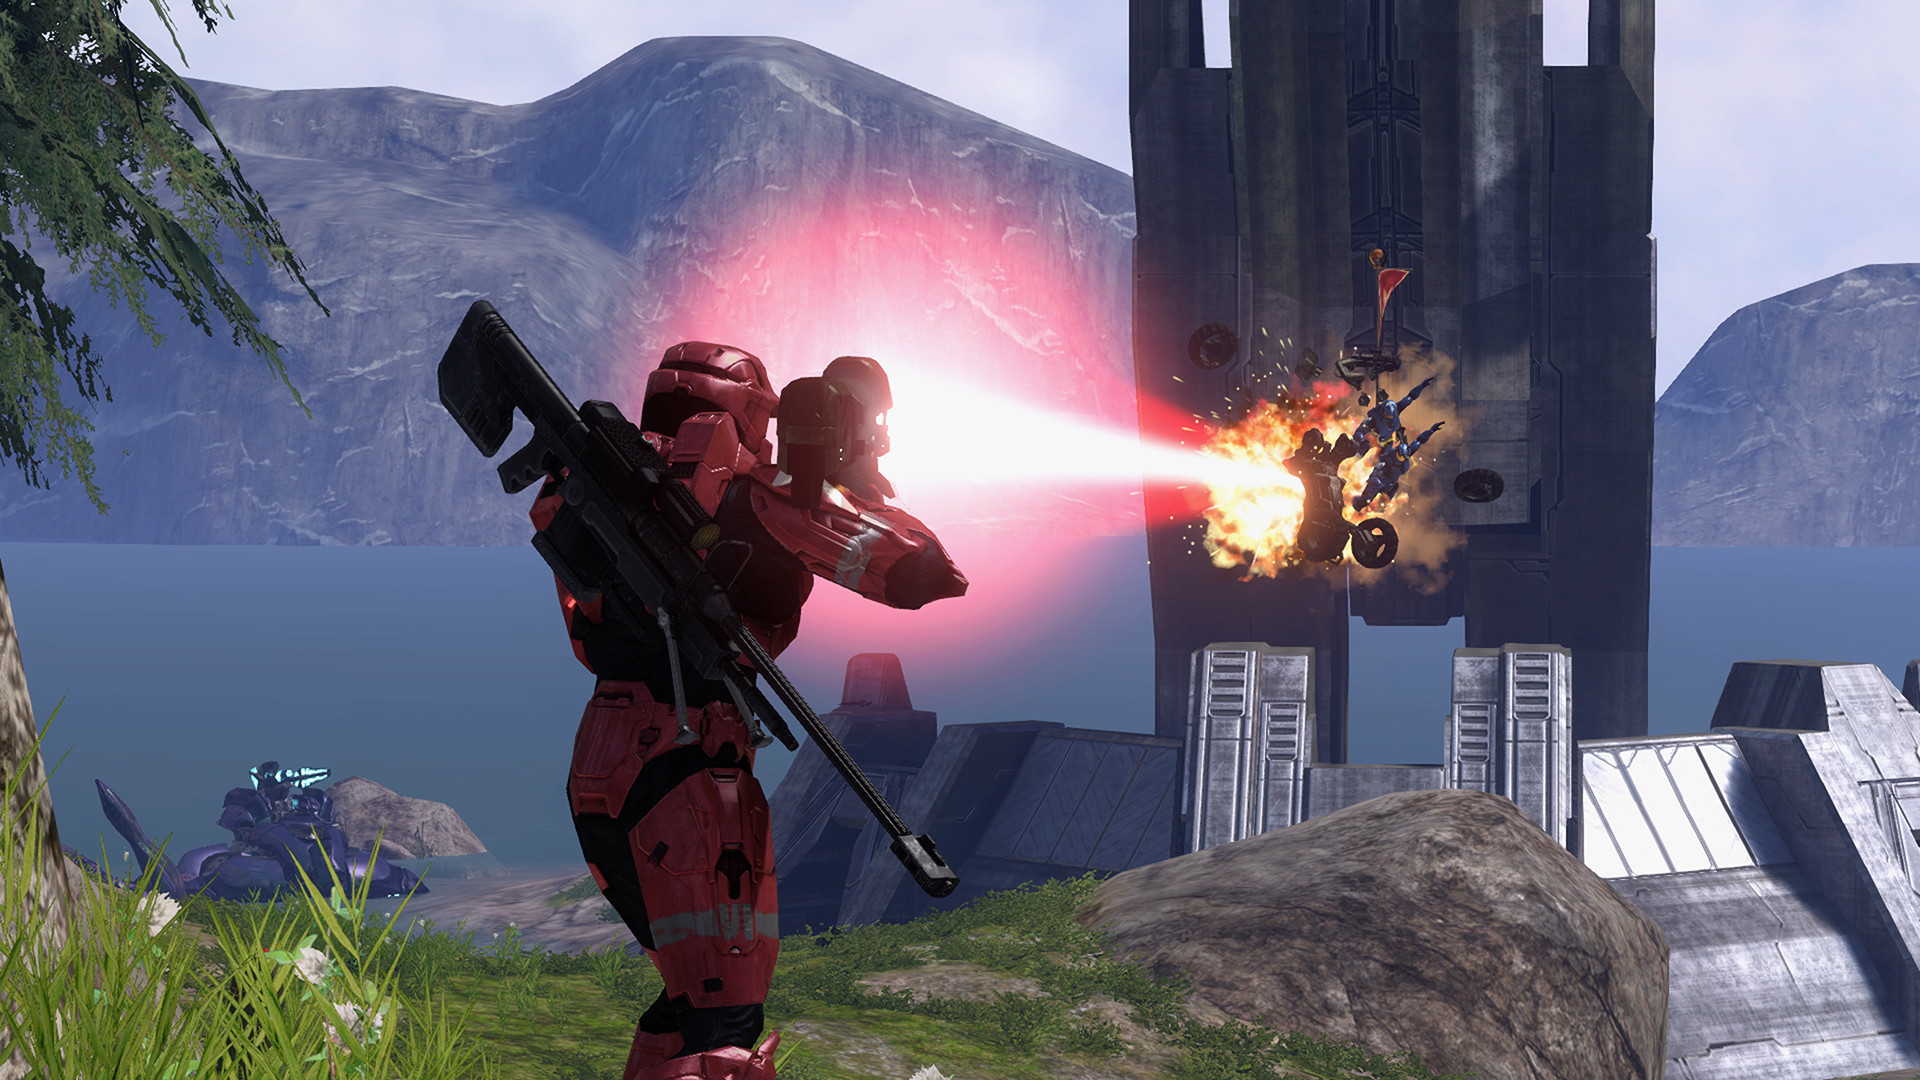 Halo 3 is getting a new map from Halo Online